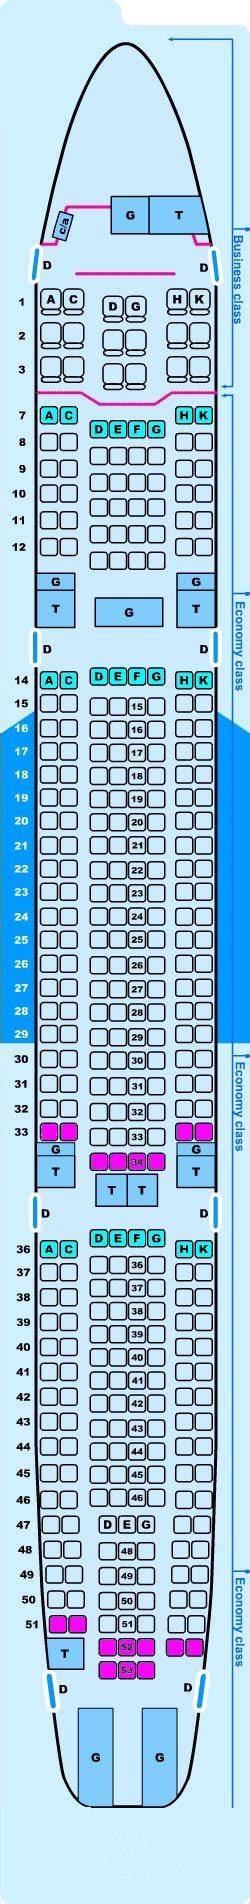 Airbus A Seating